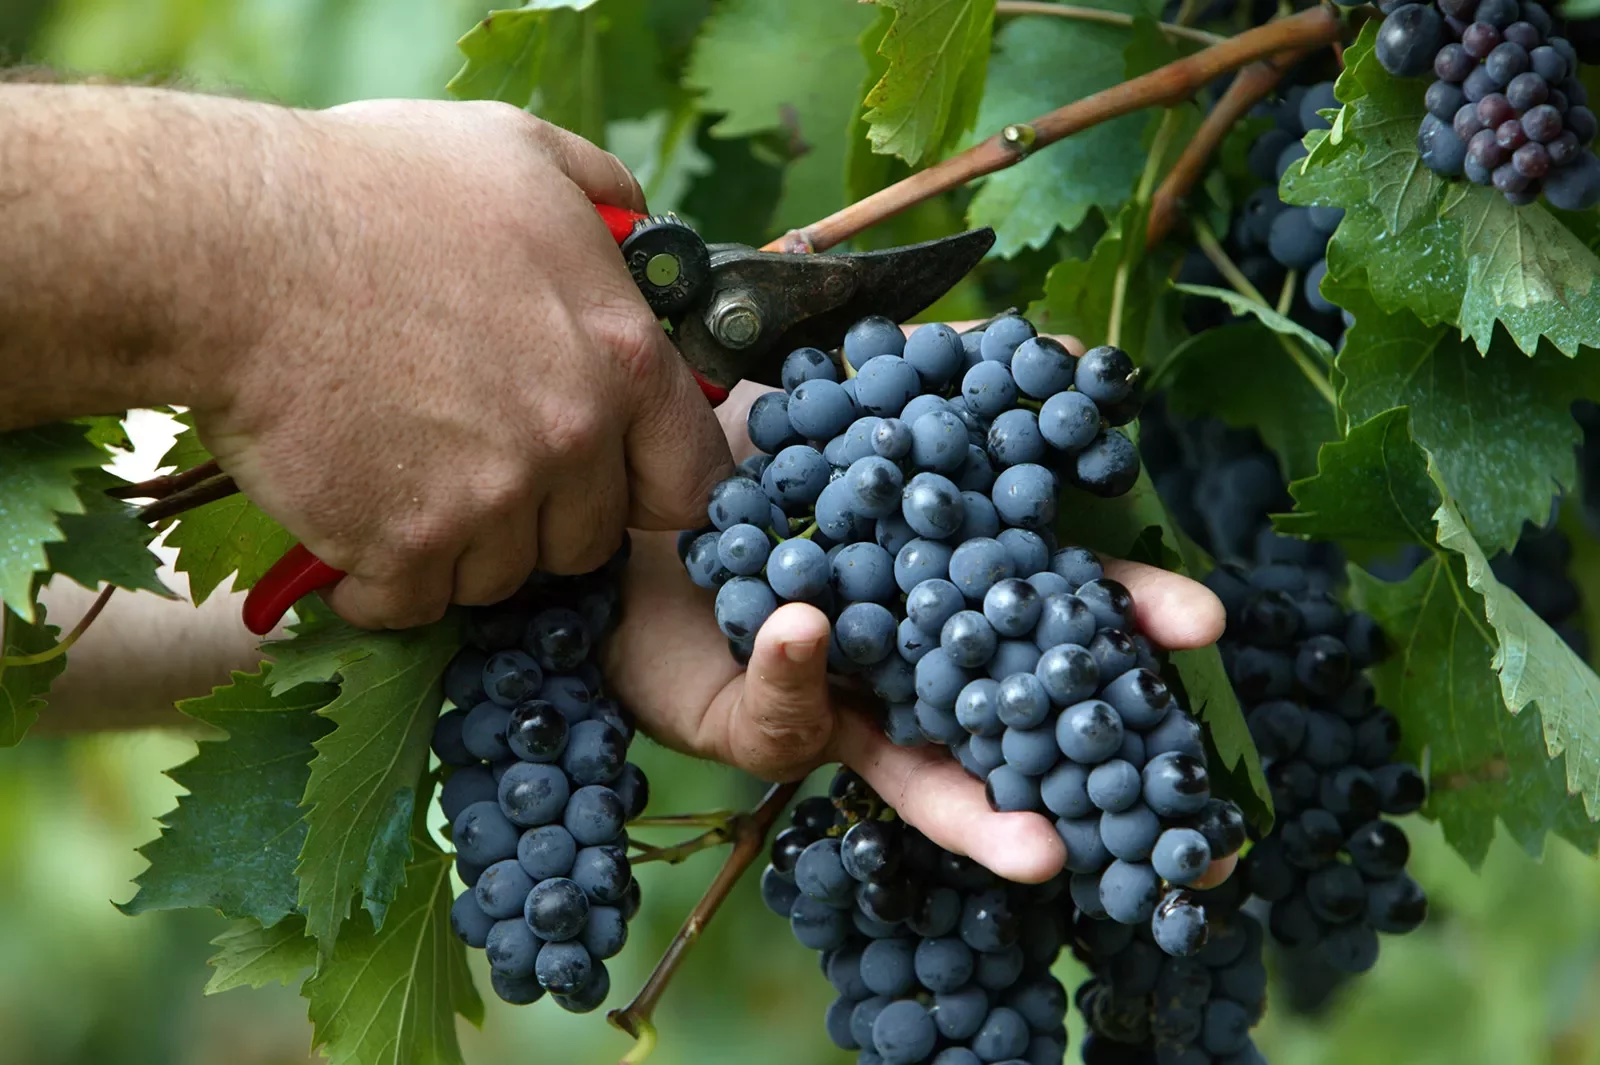 Close up of hand tending to red grapes.